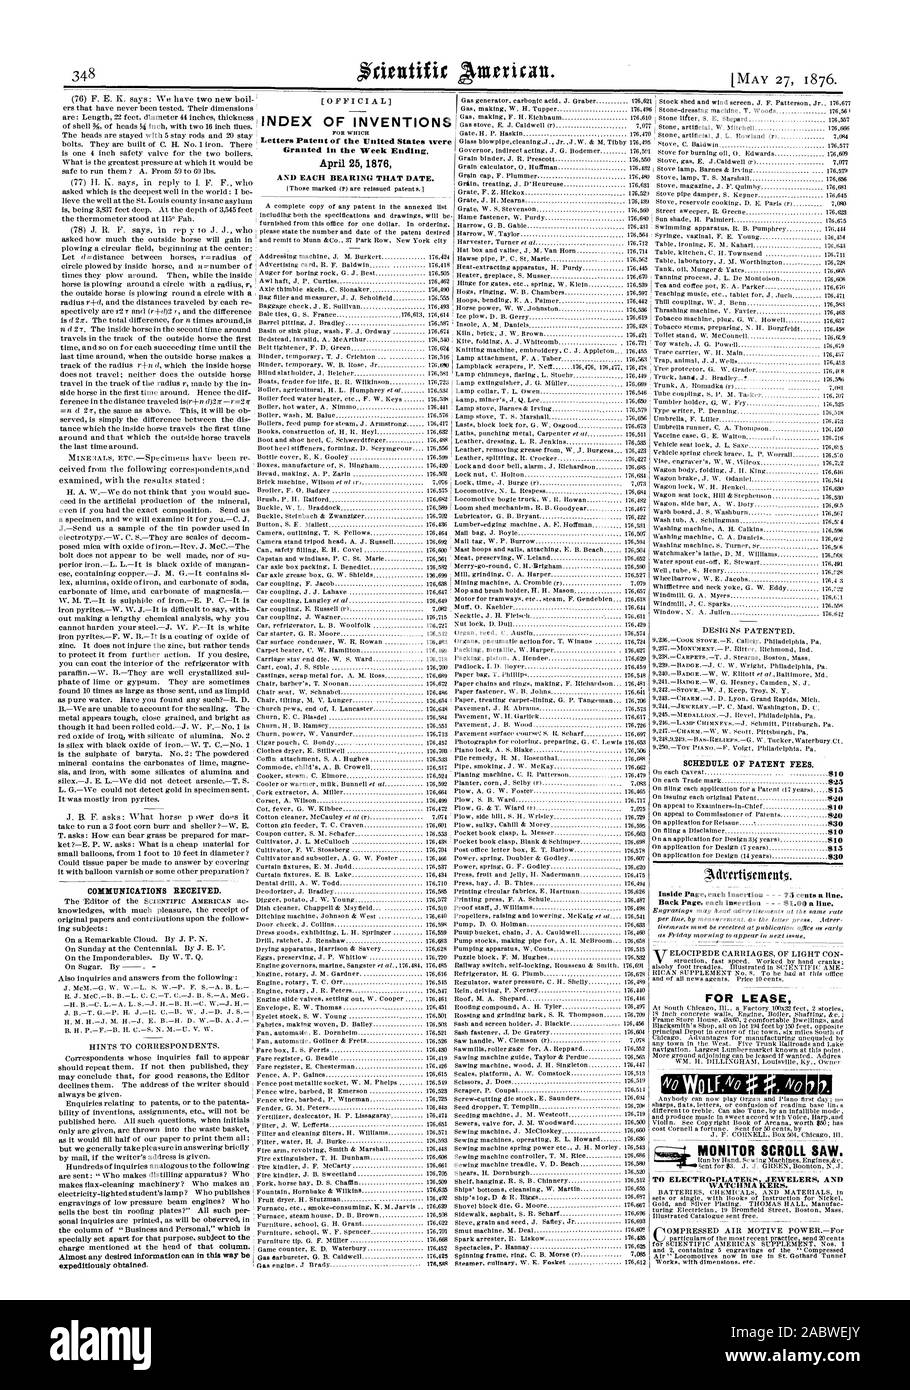 examined with the results stated : J. B. F. asks : 'What horse p  wer does it COMMUNICATIONS RECEIVED. expeditiously obtained. 1 AND EACH BEARING THAT DATE. SCHEDULE OF PATENT FEES. 810 0 0 82 MONITOR SCROLL SAW. TO ELECTRO.PLATERS_.FEWELERS AND WATCHMA KERS., scientific american, 1876-05-27 Stock Photo